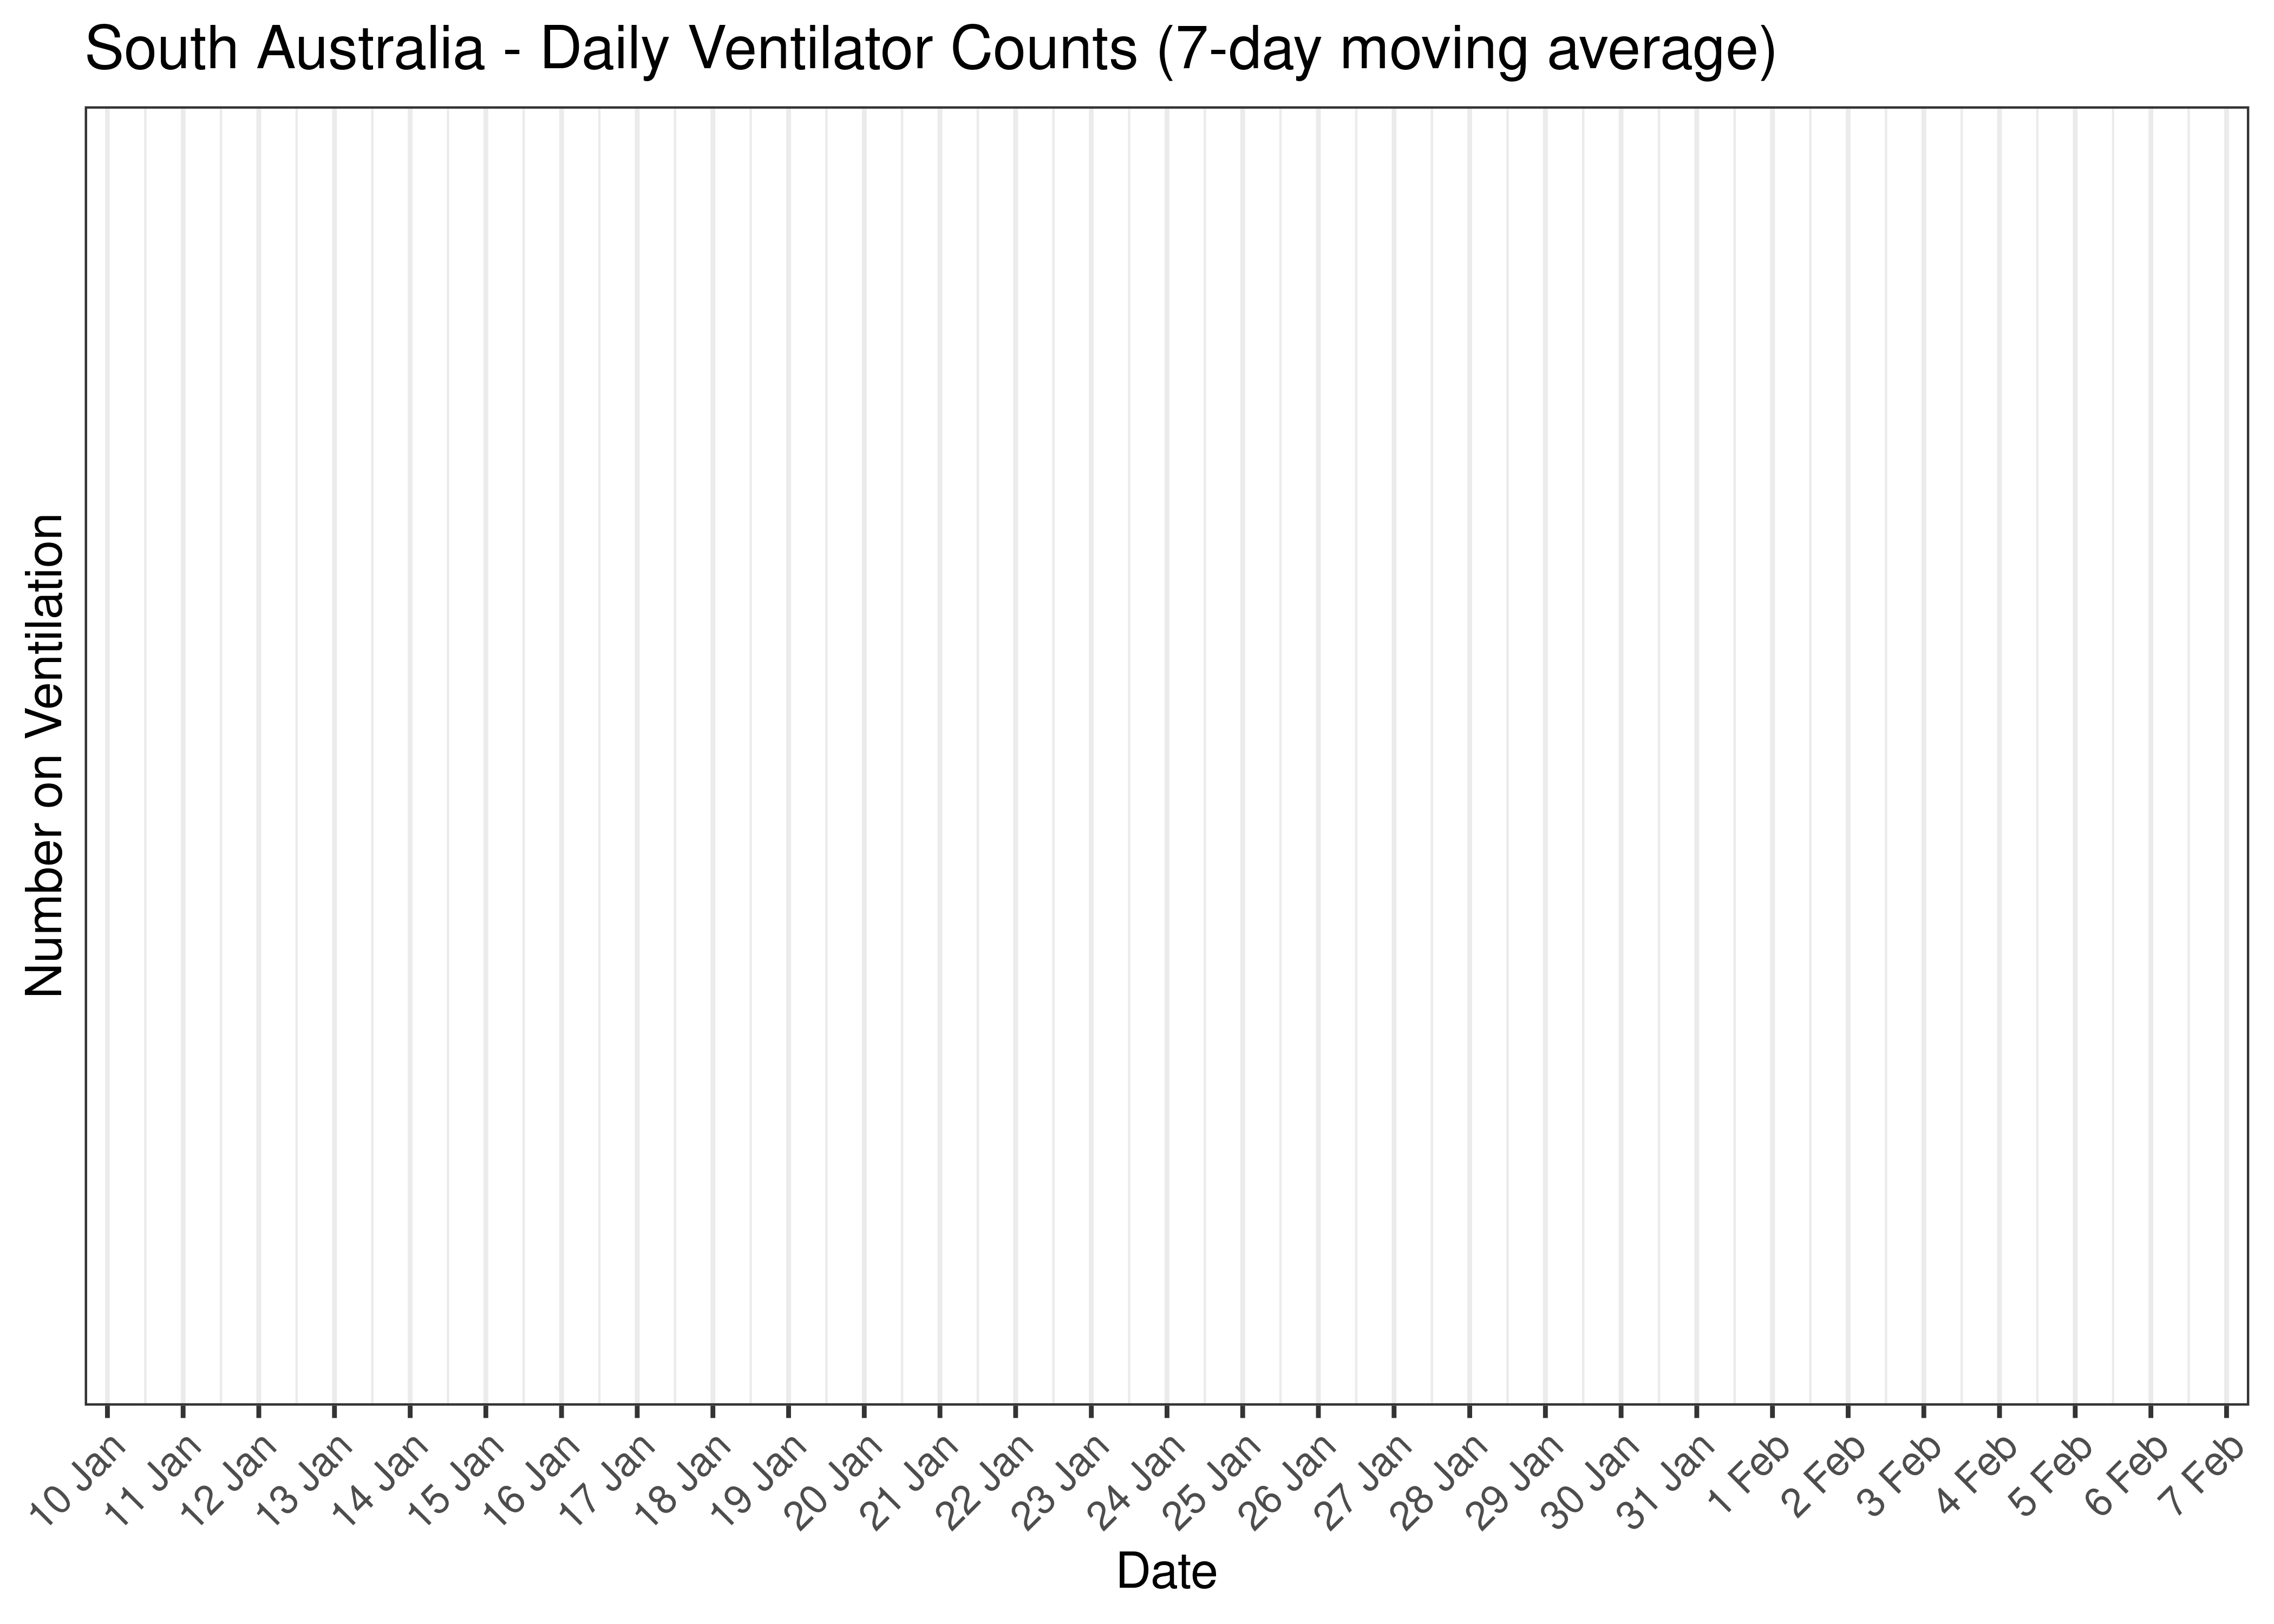 South Australia - Daily Ventilator Counts for Last 30-days (7-day moving average)